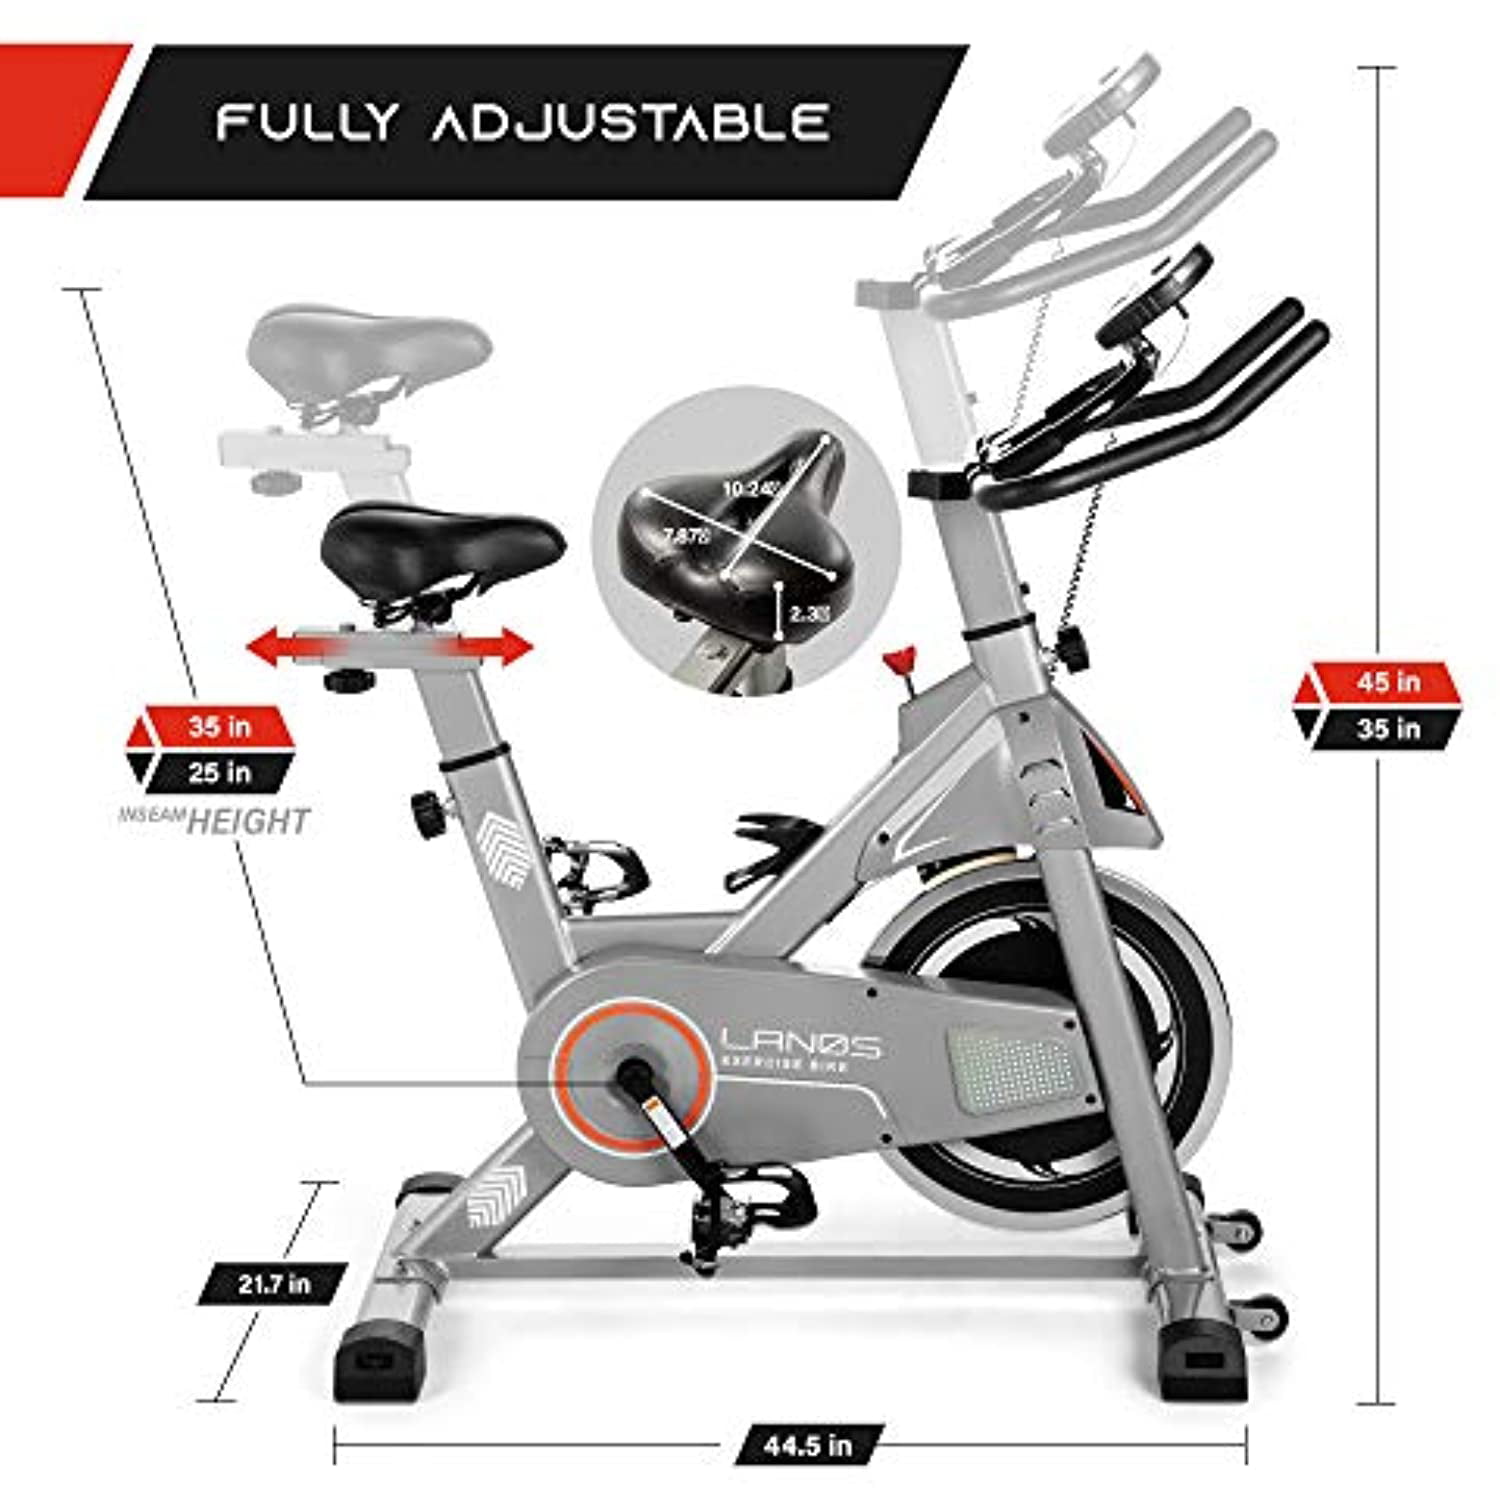 Carbon Steel Exercise Bikes with Tablet Mount FUNCYIDO Bike for Indoor Riding with LCD Monitor 270lbs Weight Capacity 35lb Flywheel Comfortable Seat Cushion Premium Cycling Bike